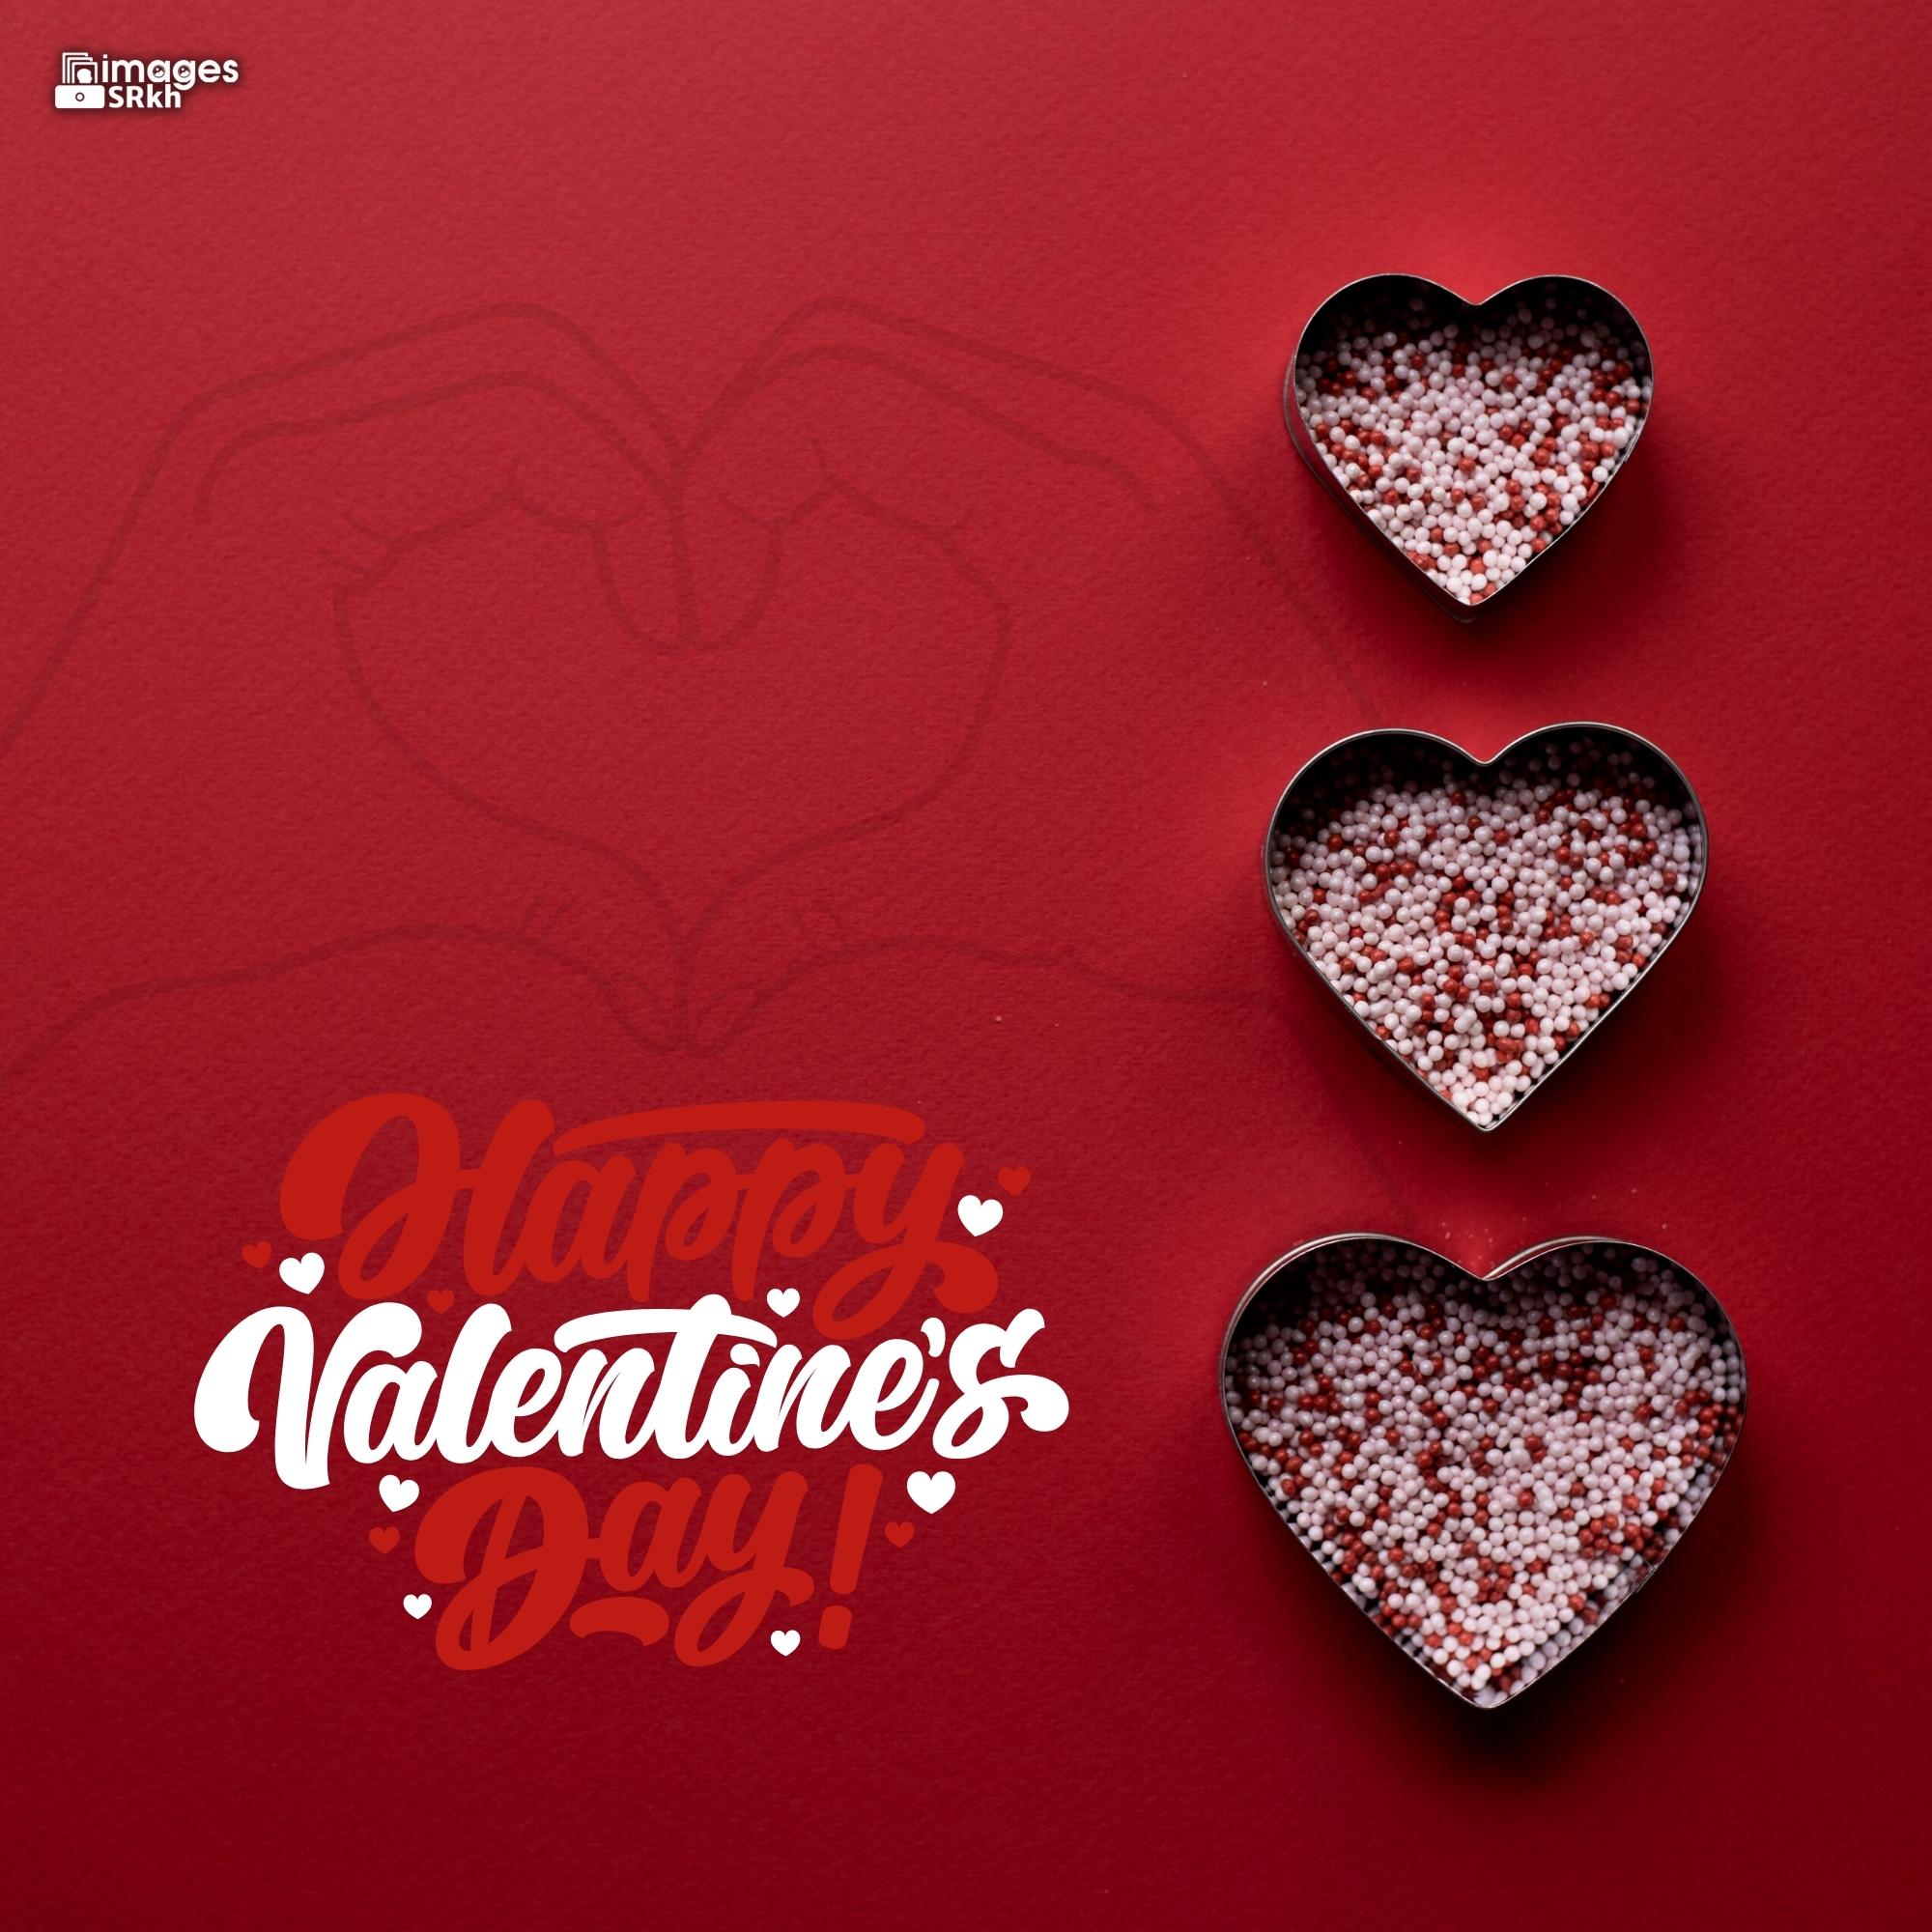 Happy Valentines Day | 545 | PREMIUM IMAGES | Wishes for Love